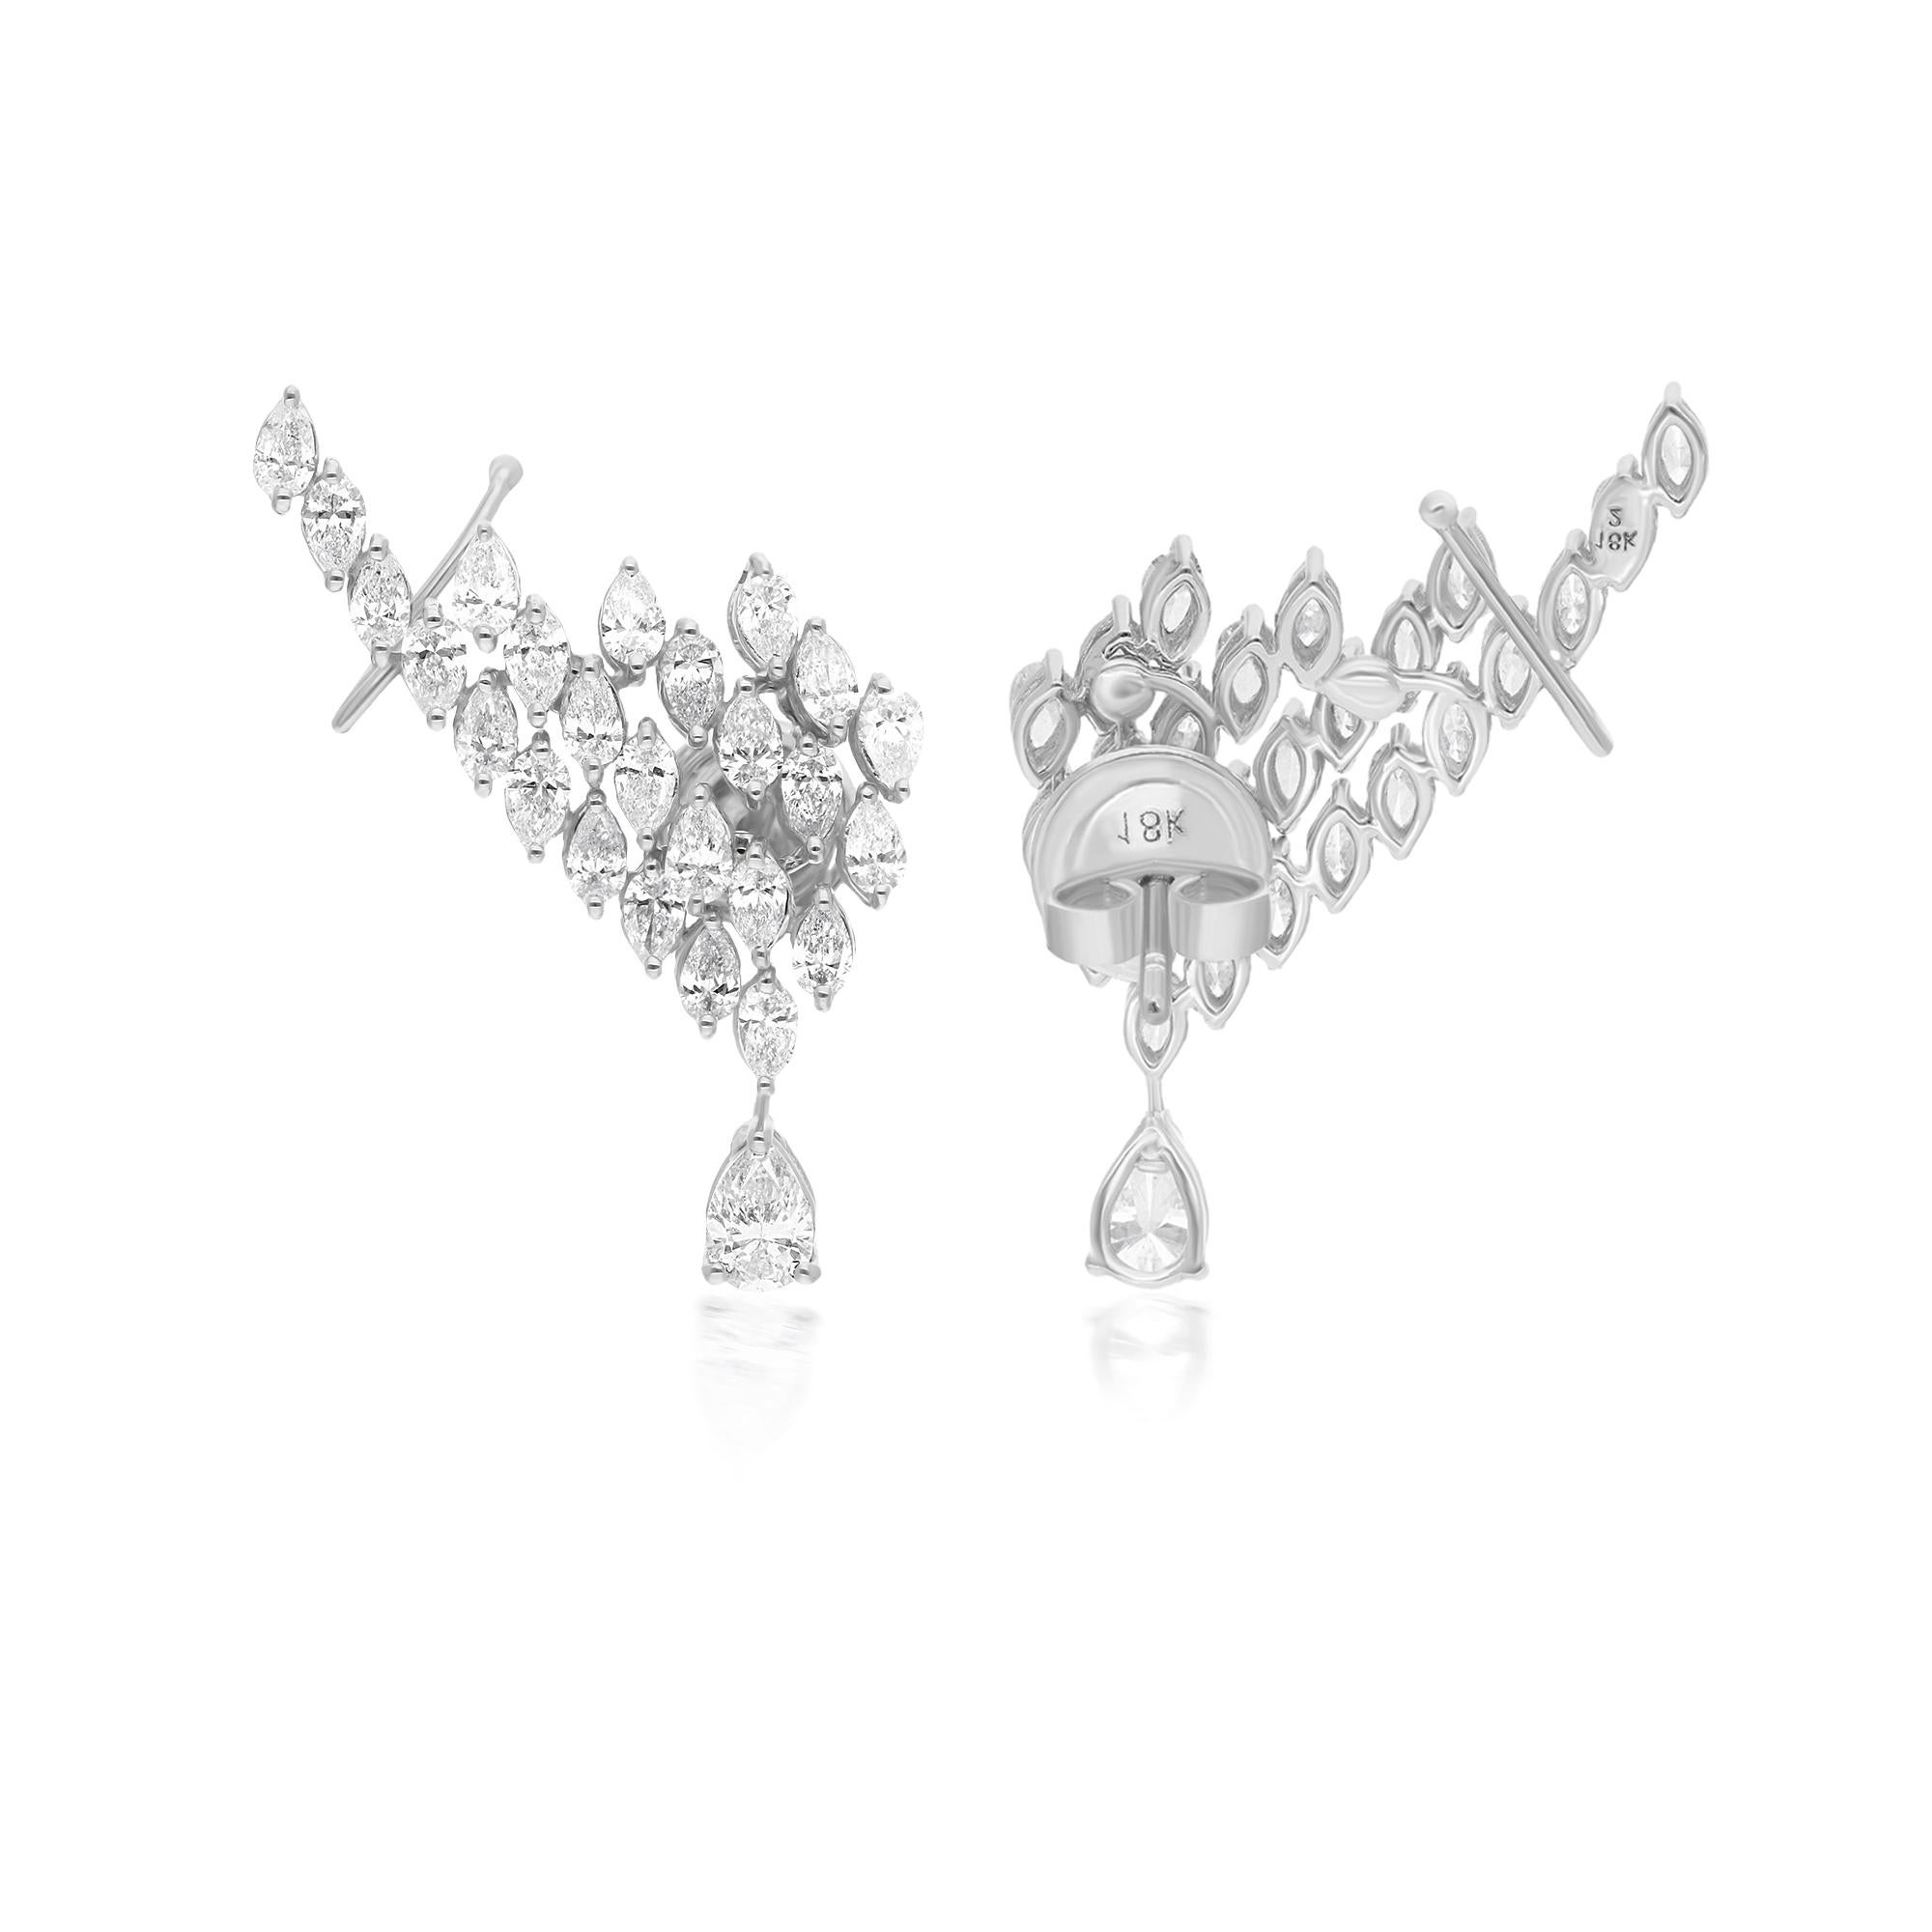 Indulge in the allure of timeless elegance with these enchanting 3.36 Carat Marquise & Pear Diamond Ear Cuff Earrings, a captivating display of sophistication meticulously crafted in luminous 14 Karat White Gold. These earrings redefine luxury with